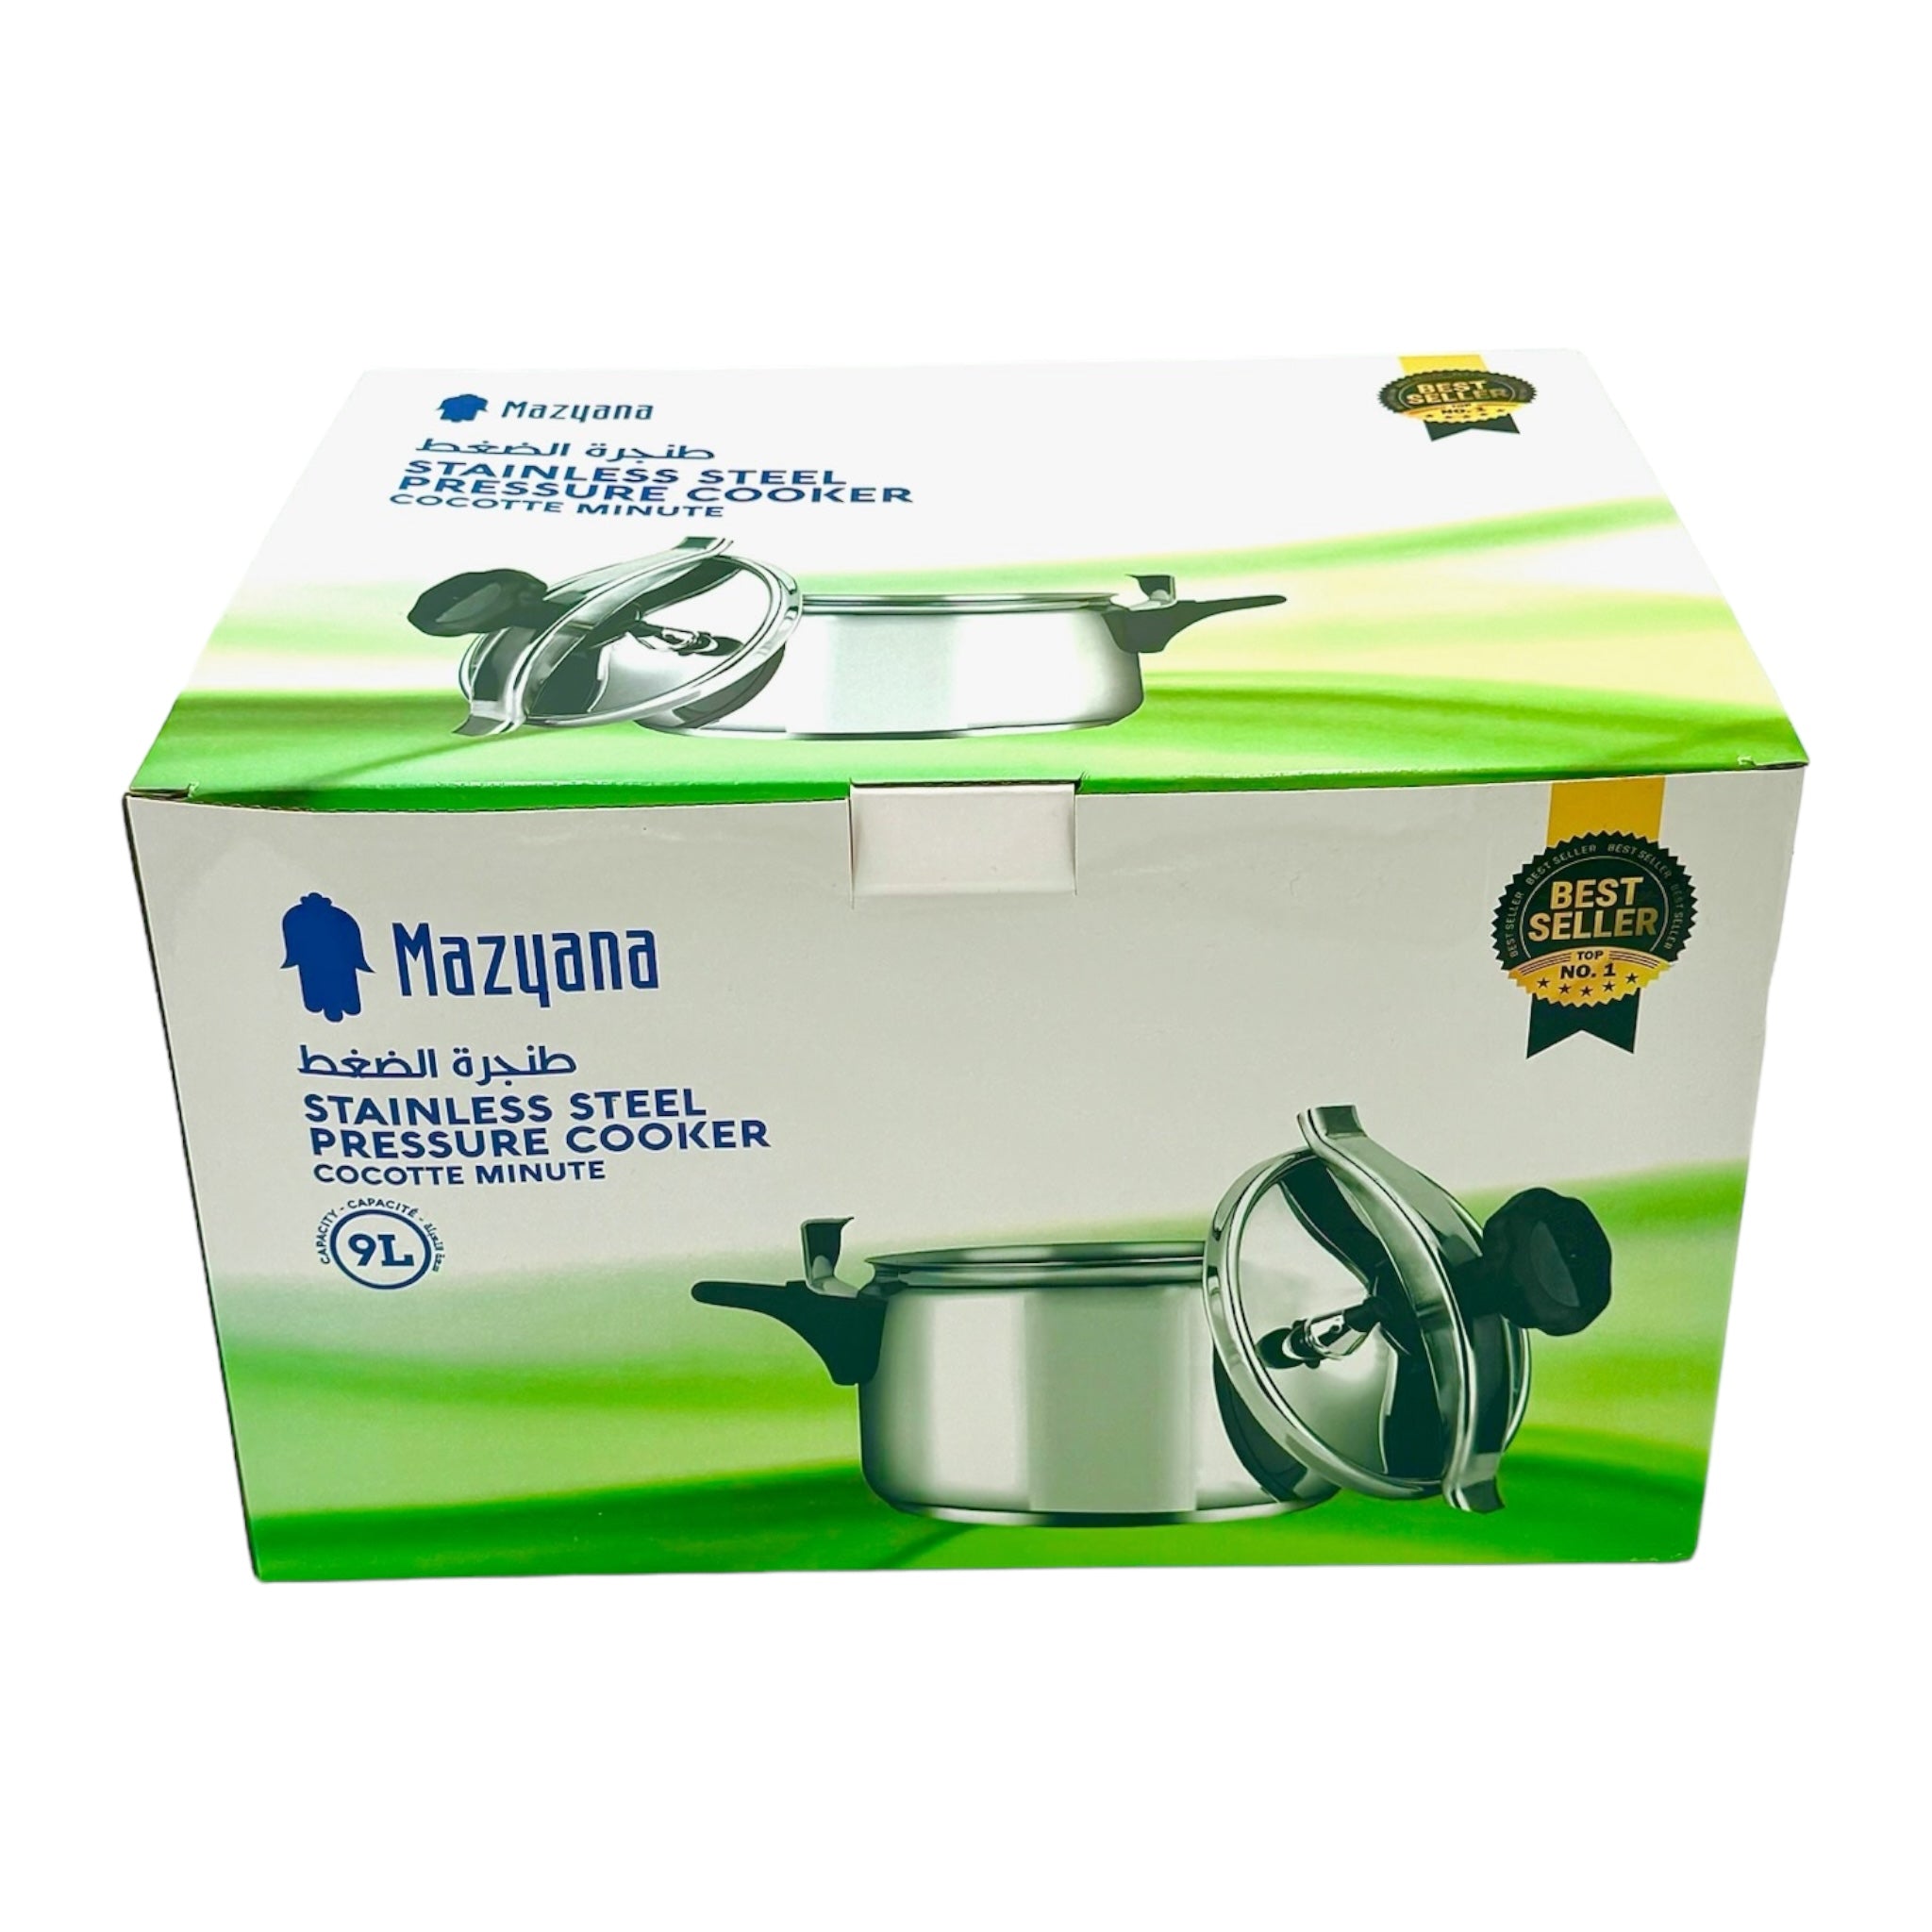 Stainless Steel Pressure Cooker 9L | Cocotte Minute by Mazyana